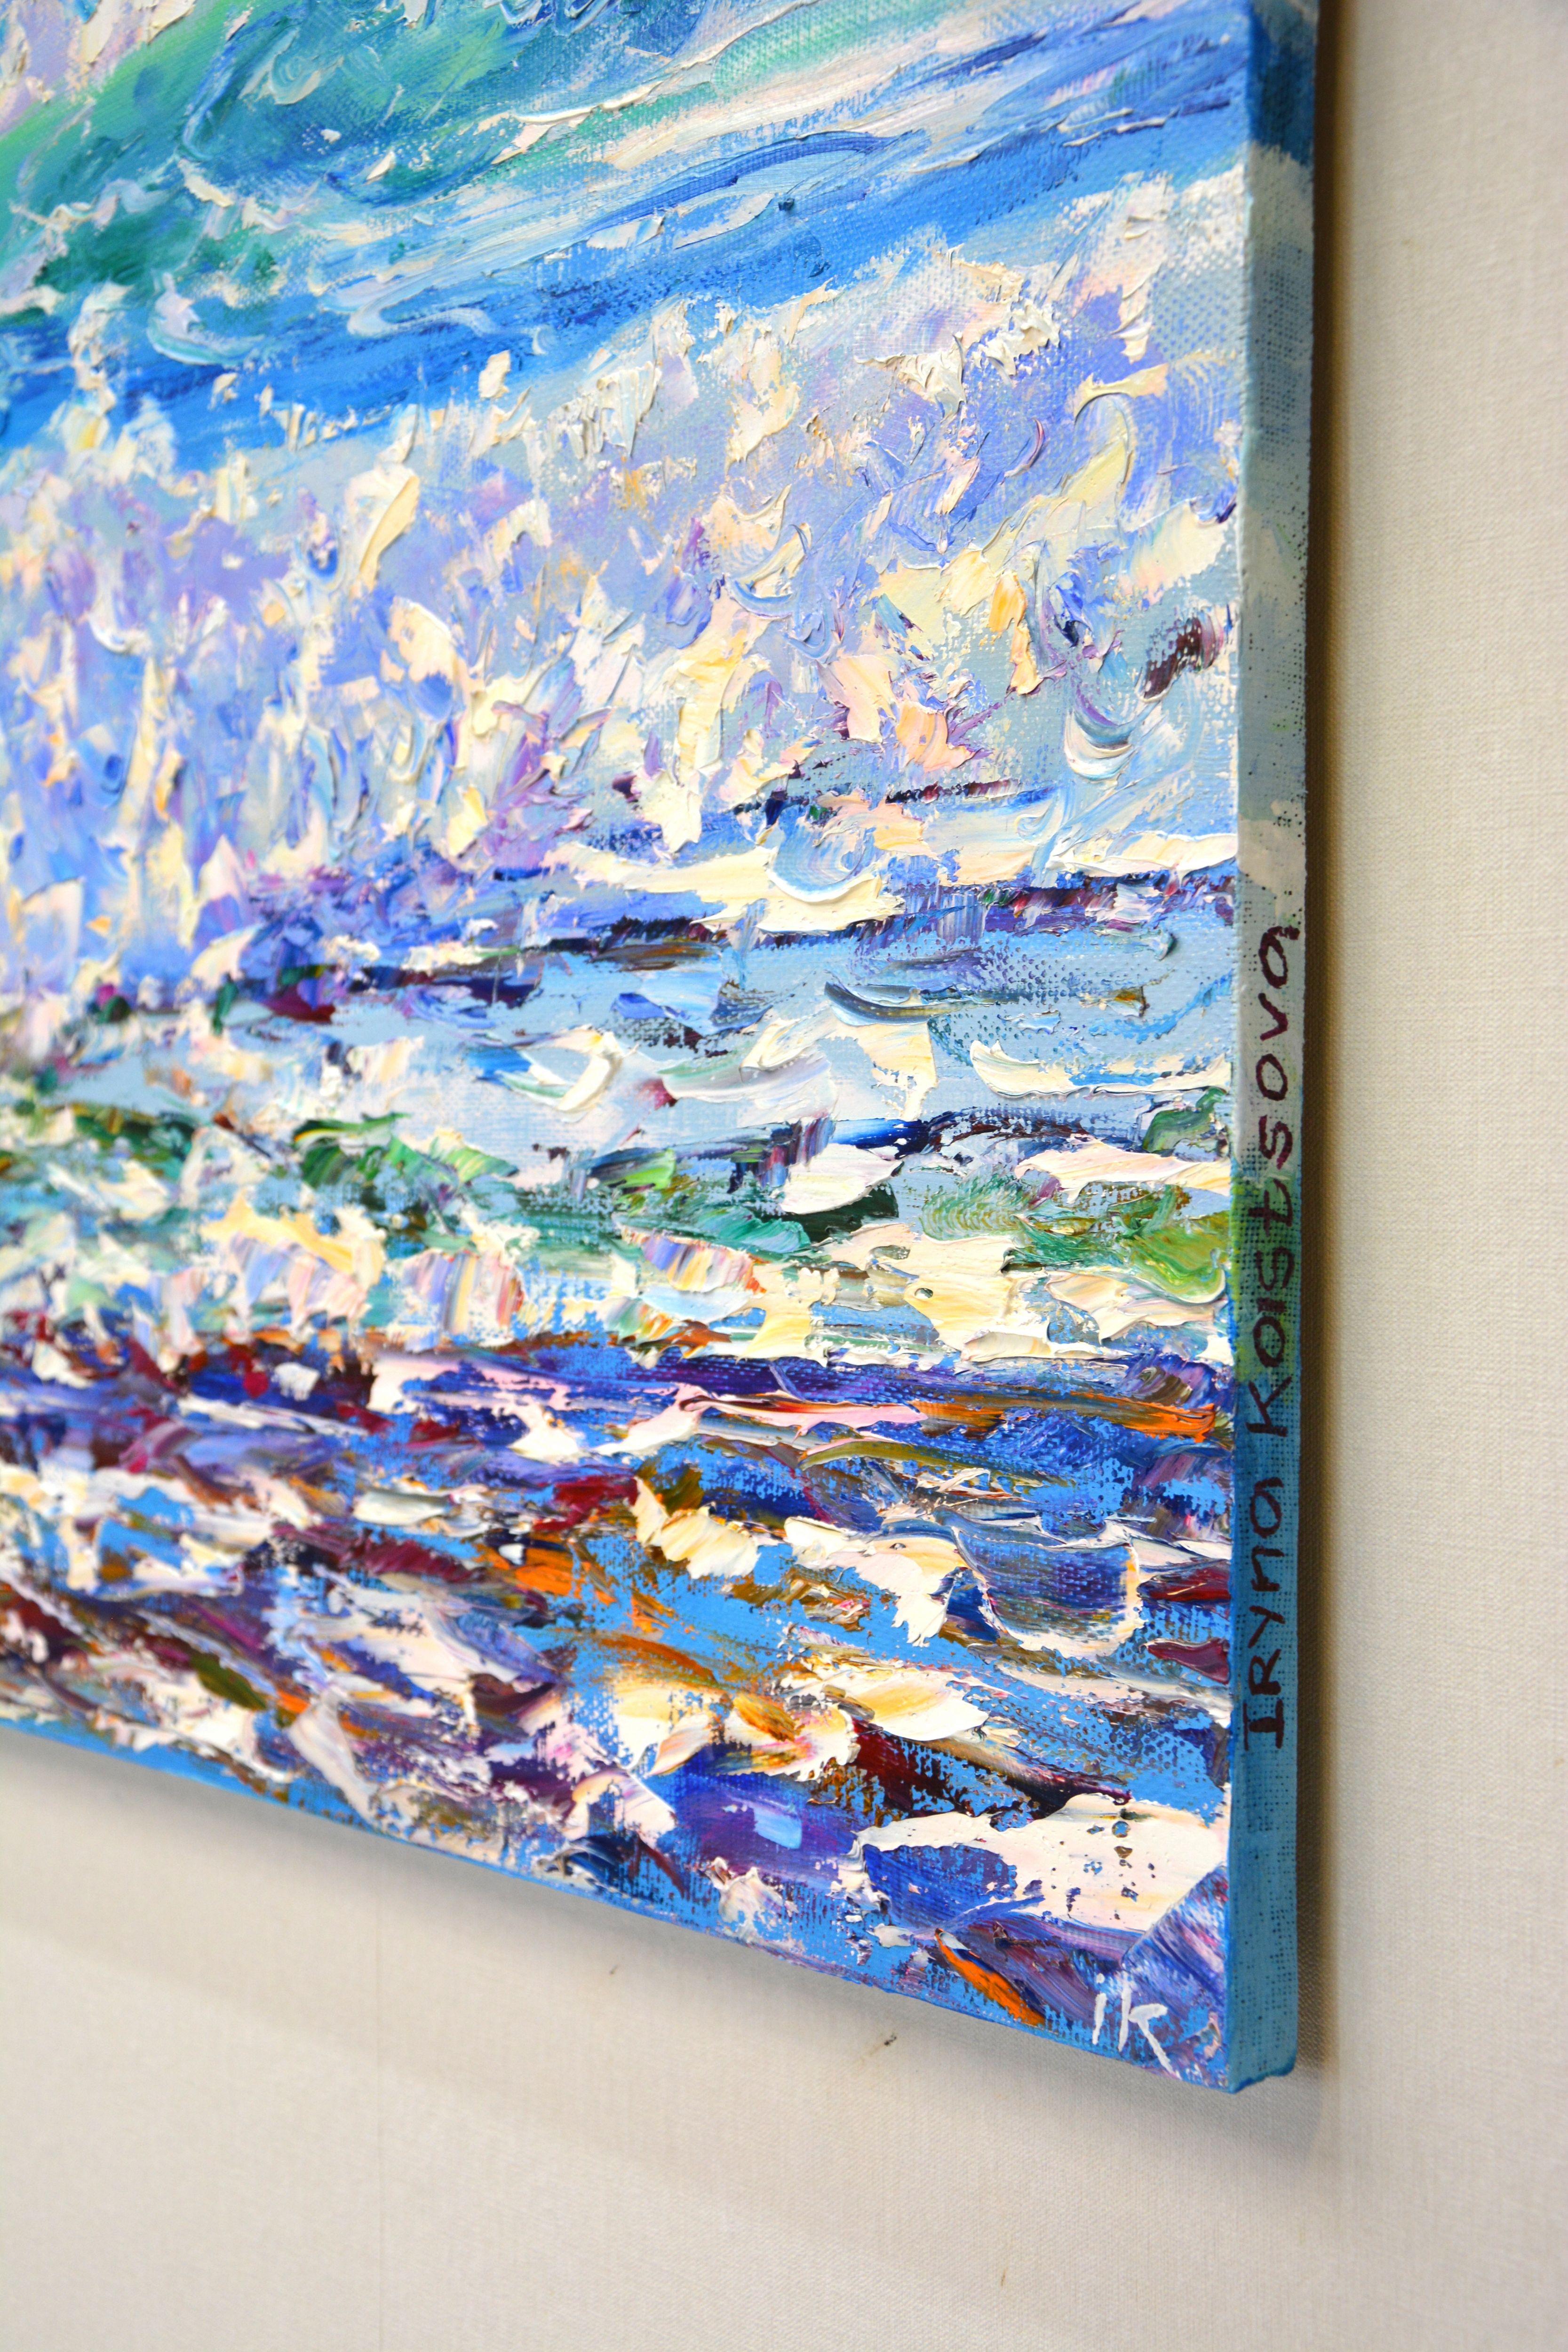 Ocean waves. Sailboats., Painting, Oil on Canvas 3